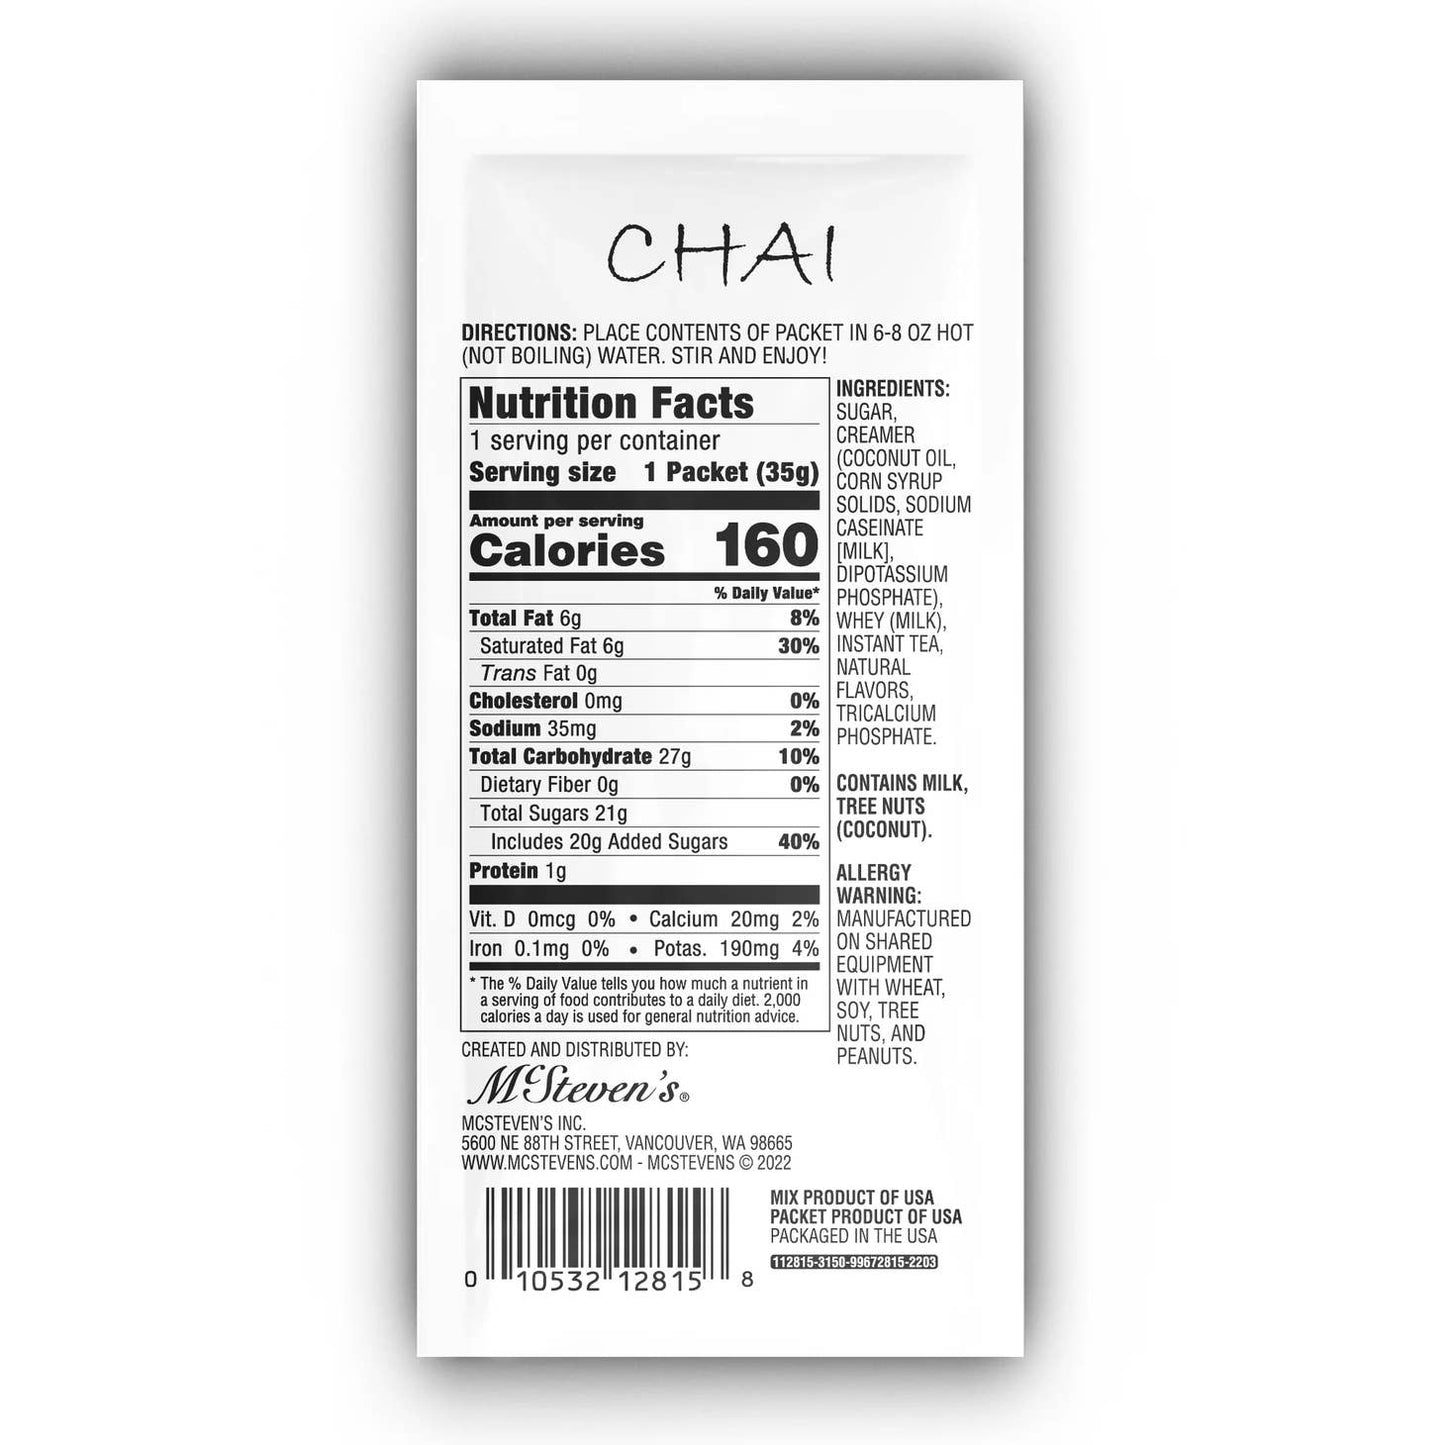 Image of the back of packet showing nurtrition facts and ingredient list. Please call 501-327-2182 for more information.